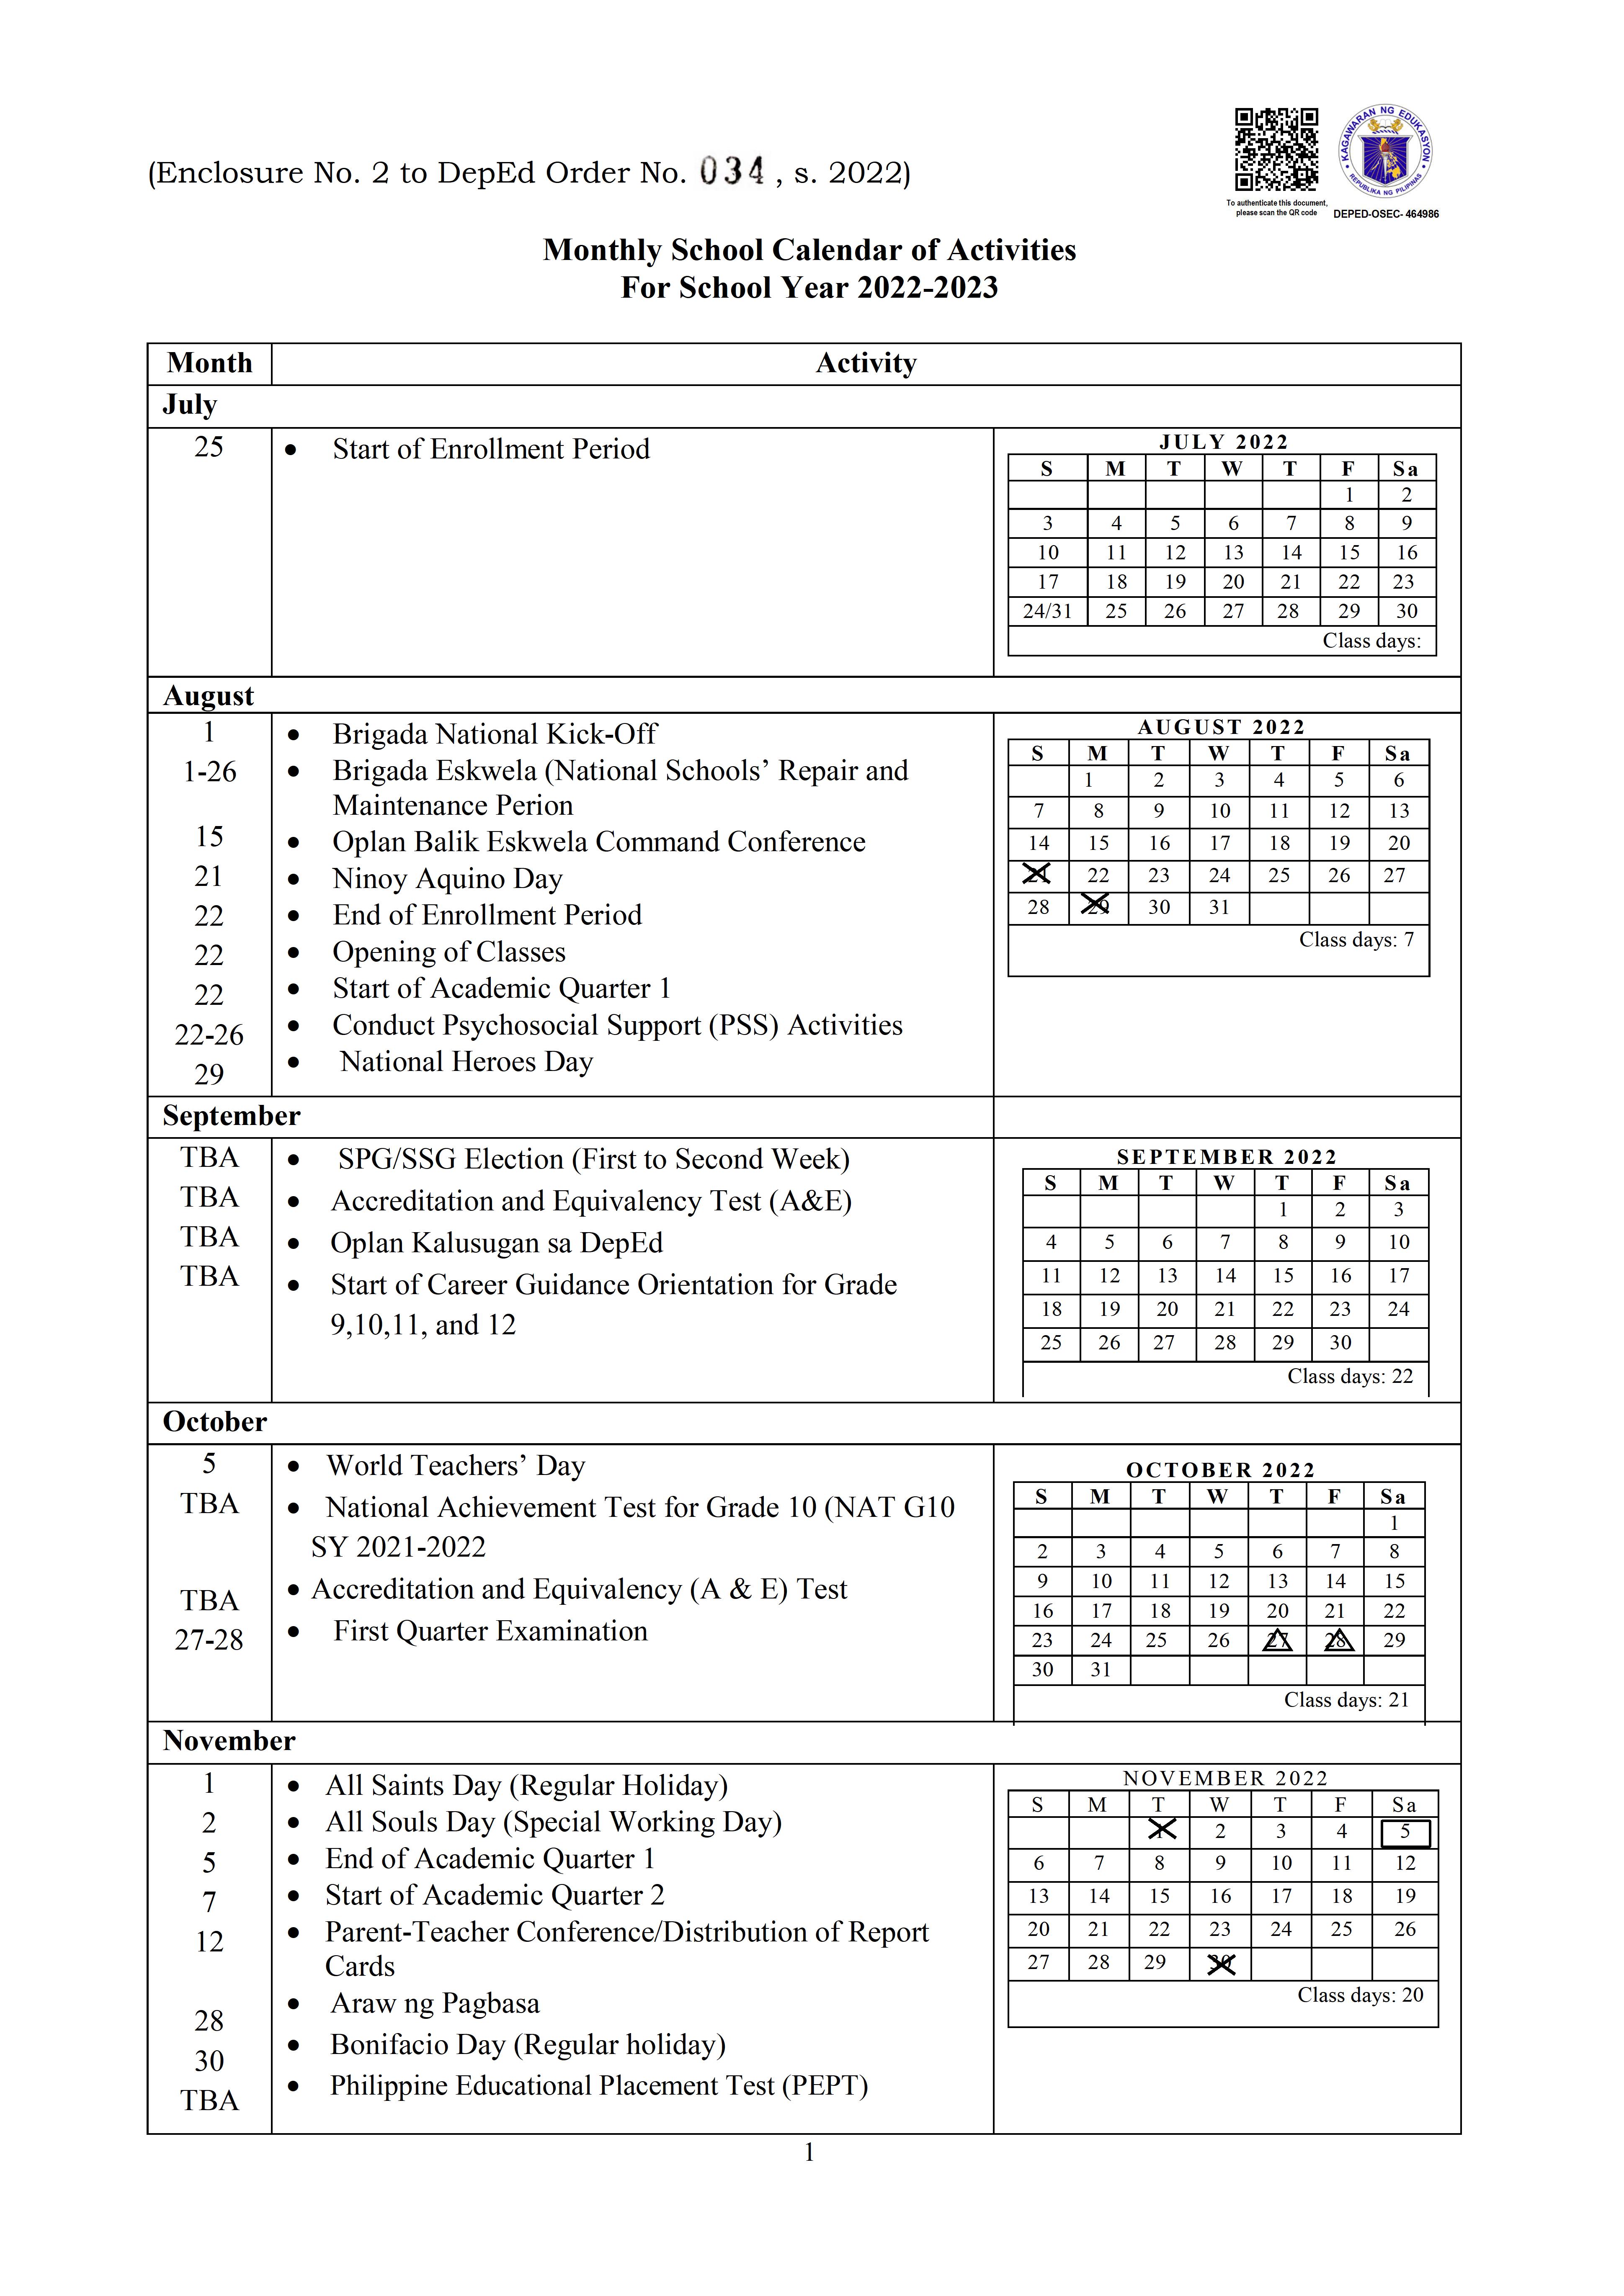 Deped Released Official School Calendar And Activities For Sy 2021 2022